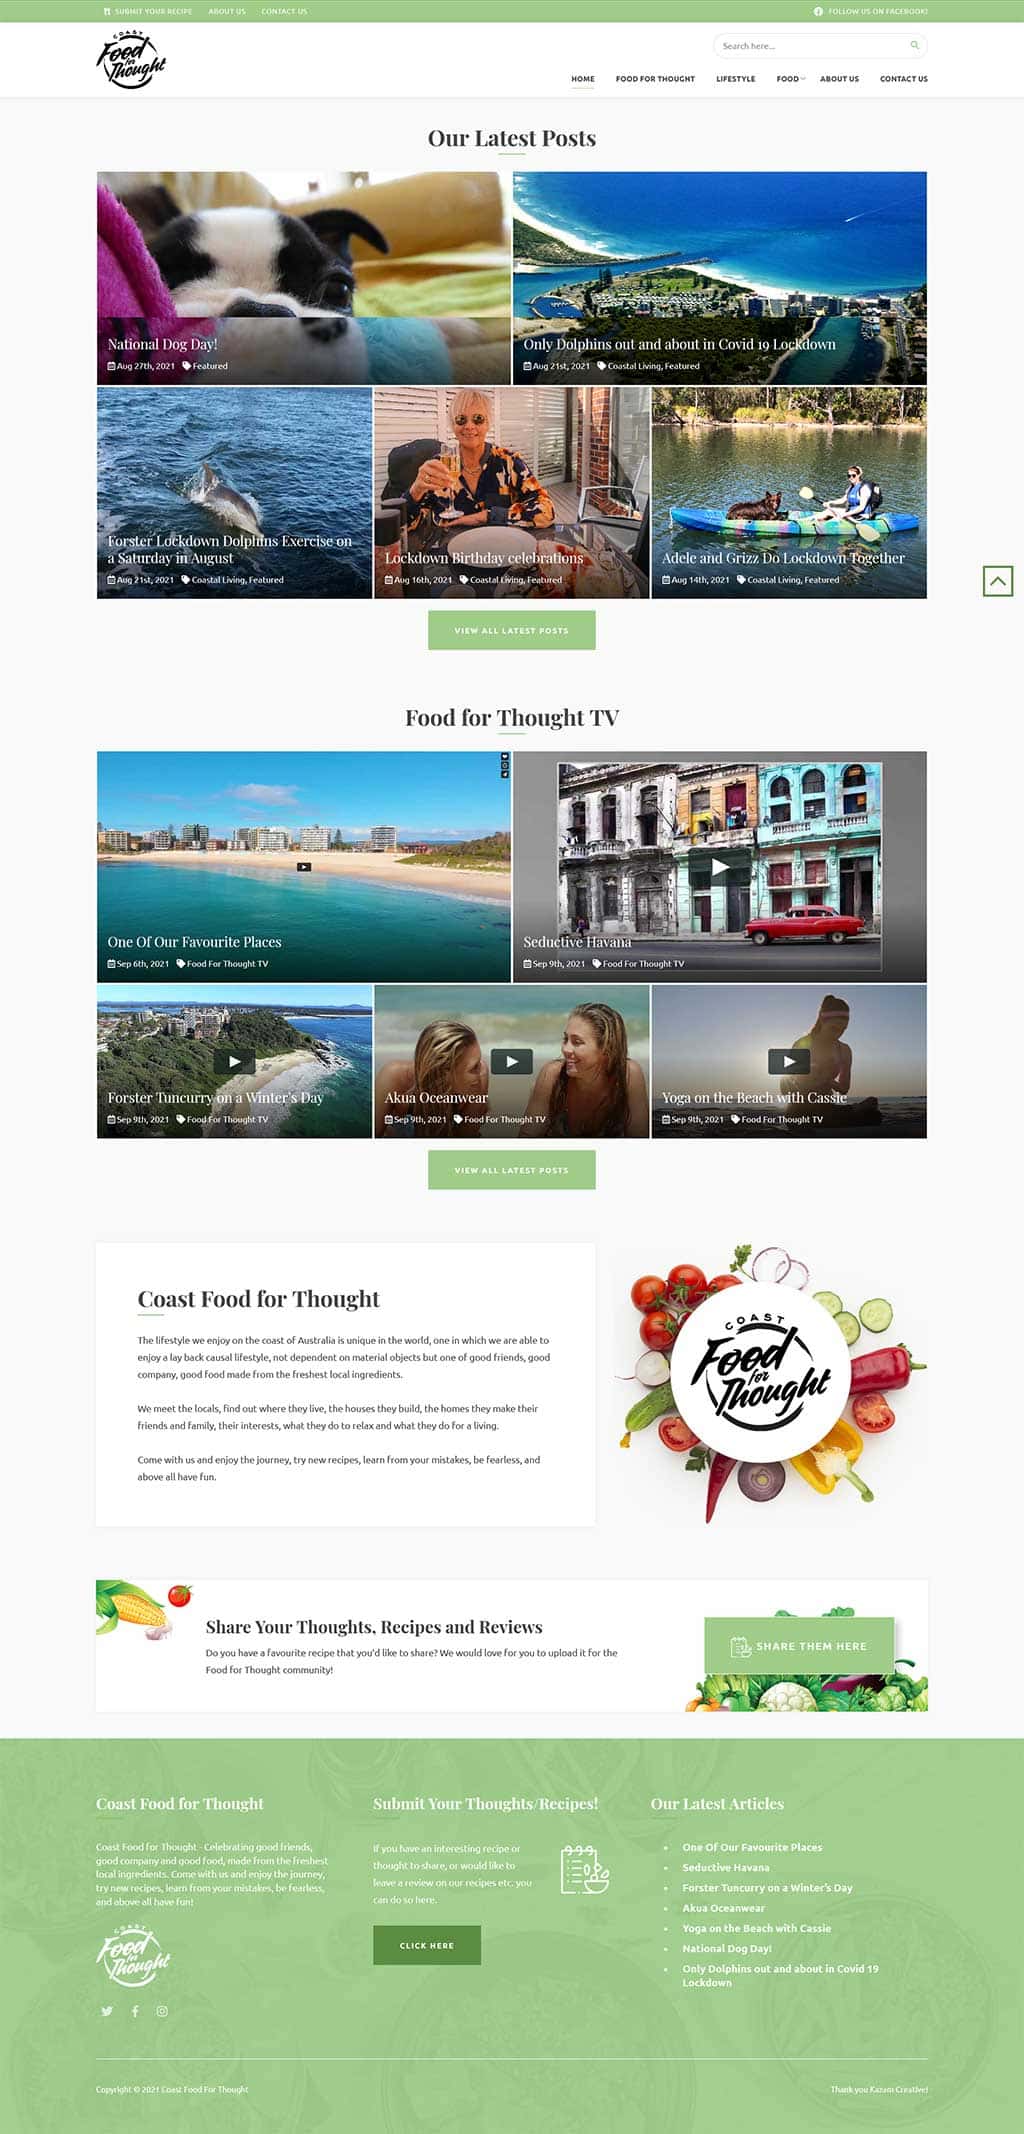 Website Design Client - Coast Food for Thought